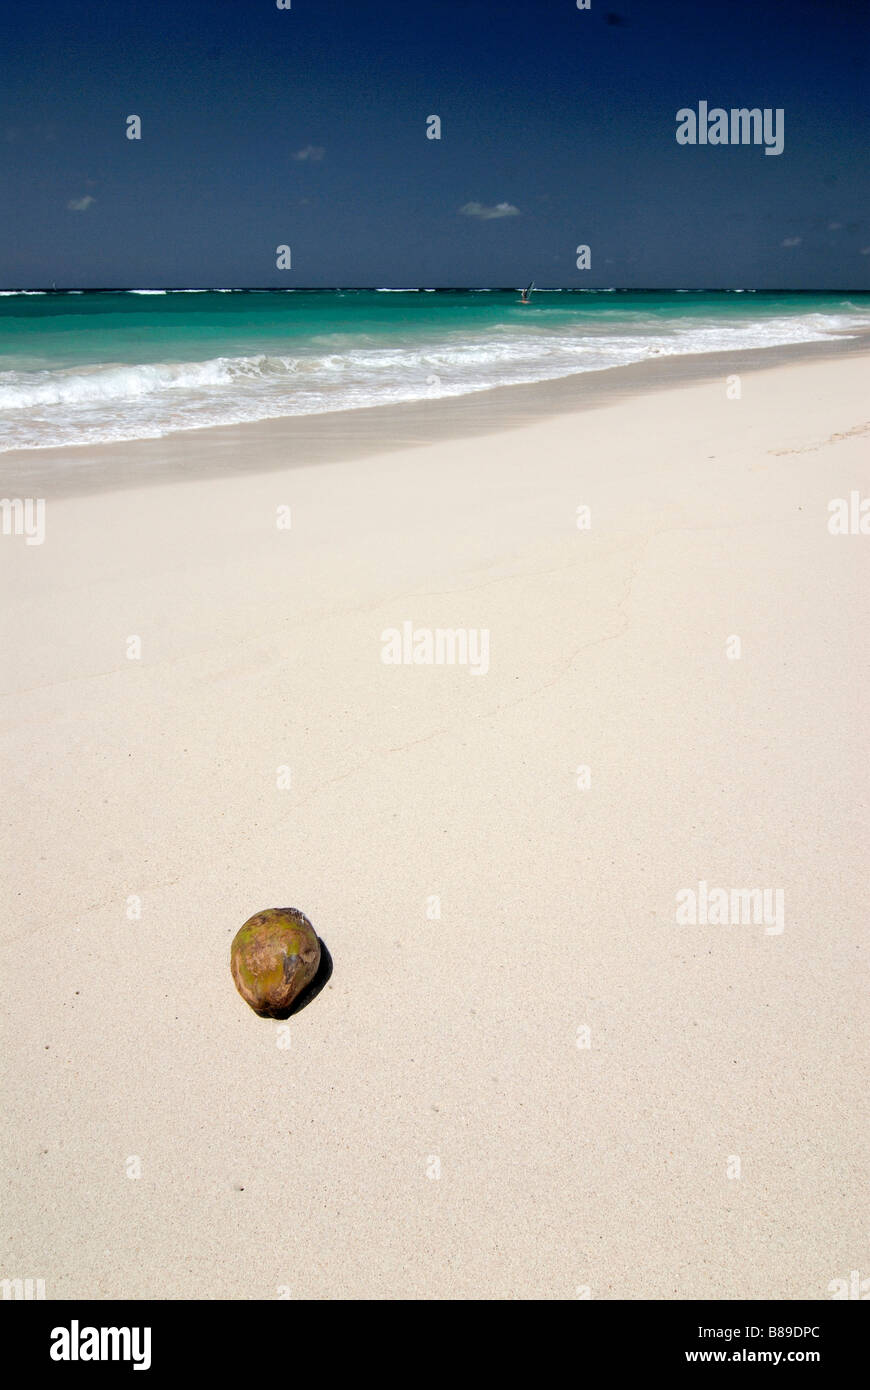 A coconut lying alone in the Silver Sand sand at a beach at Barbados Caribbean Stock Photo